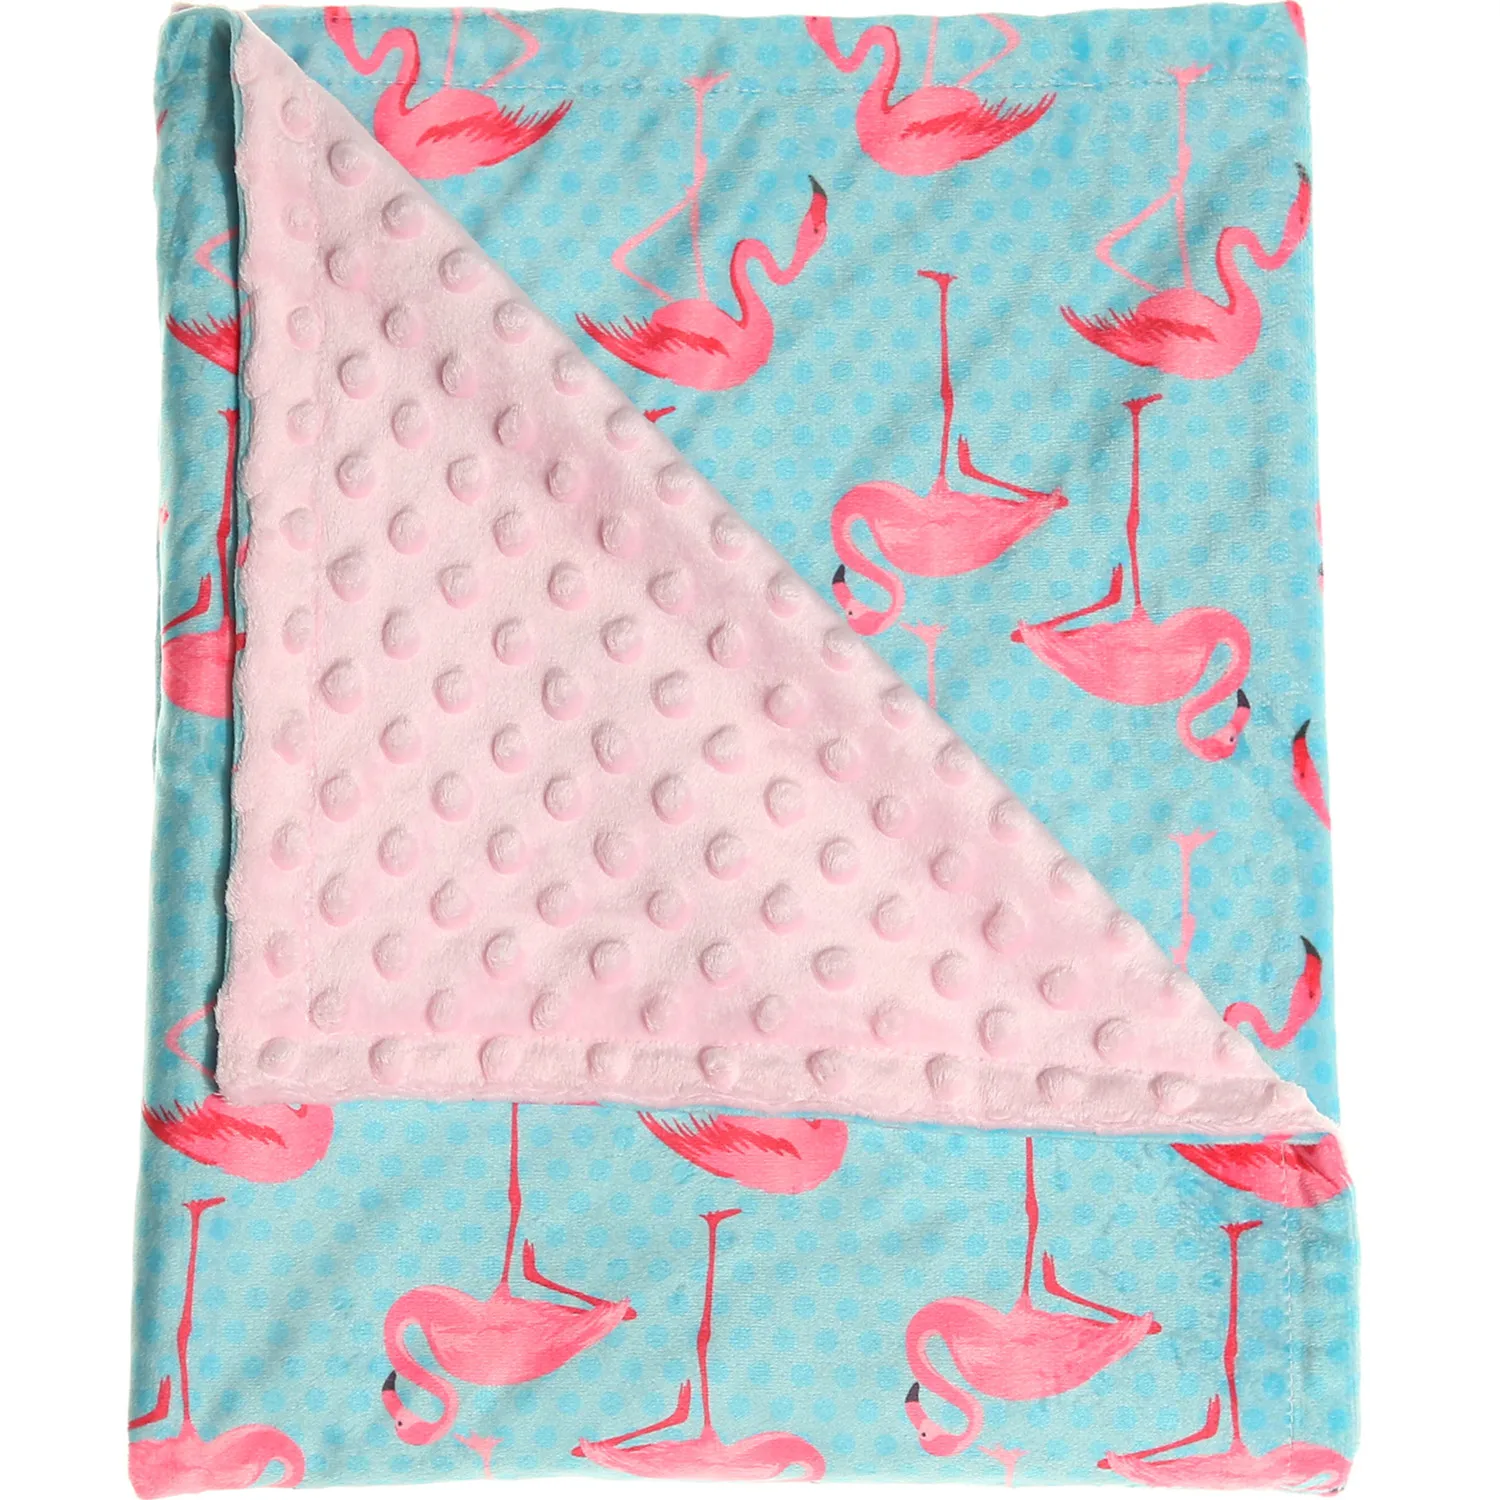 

Baby Blanket Super Soft Minky Blanket with Double Layer Dotted Backing Pink Flamingo Security Blanket for Newborns Nursery